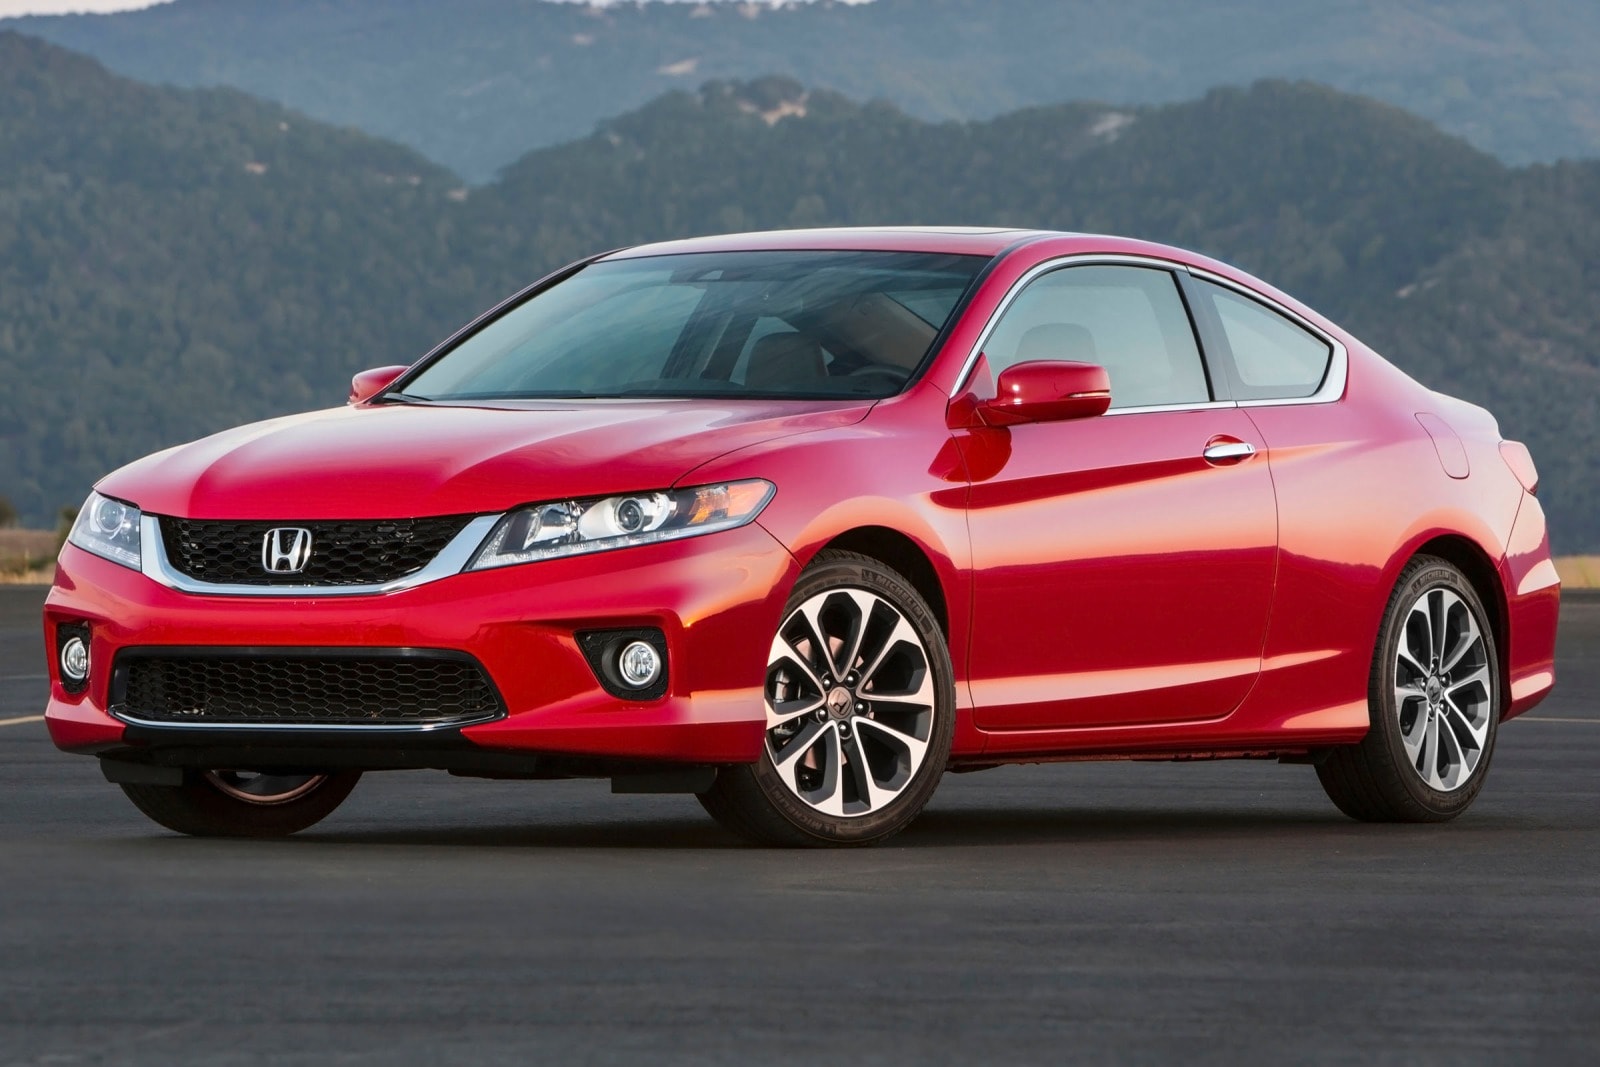 Used 2014 Honda Accord Coupe Review | Edmunds